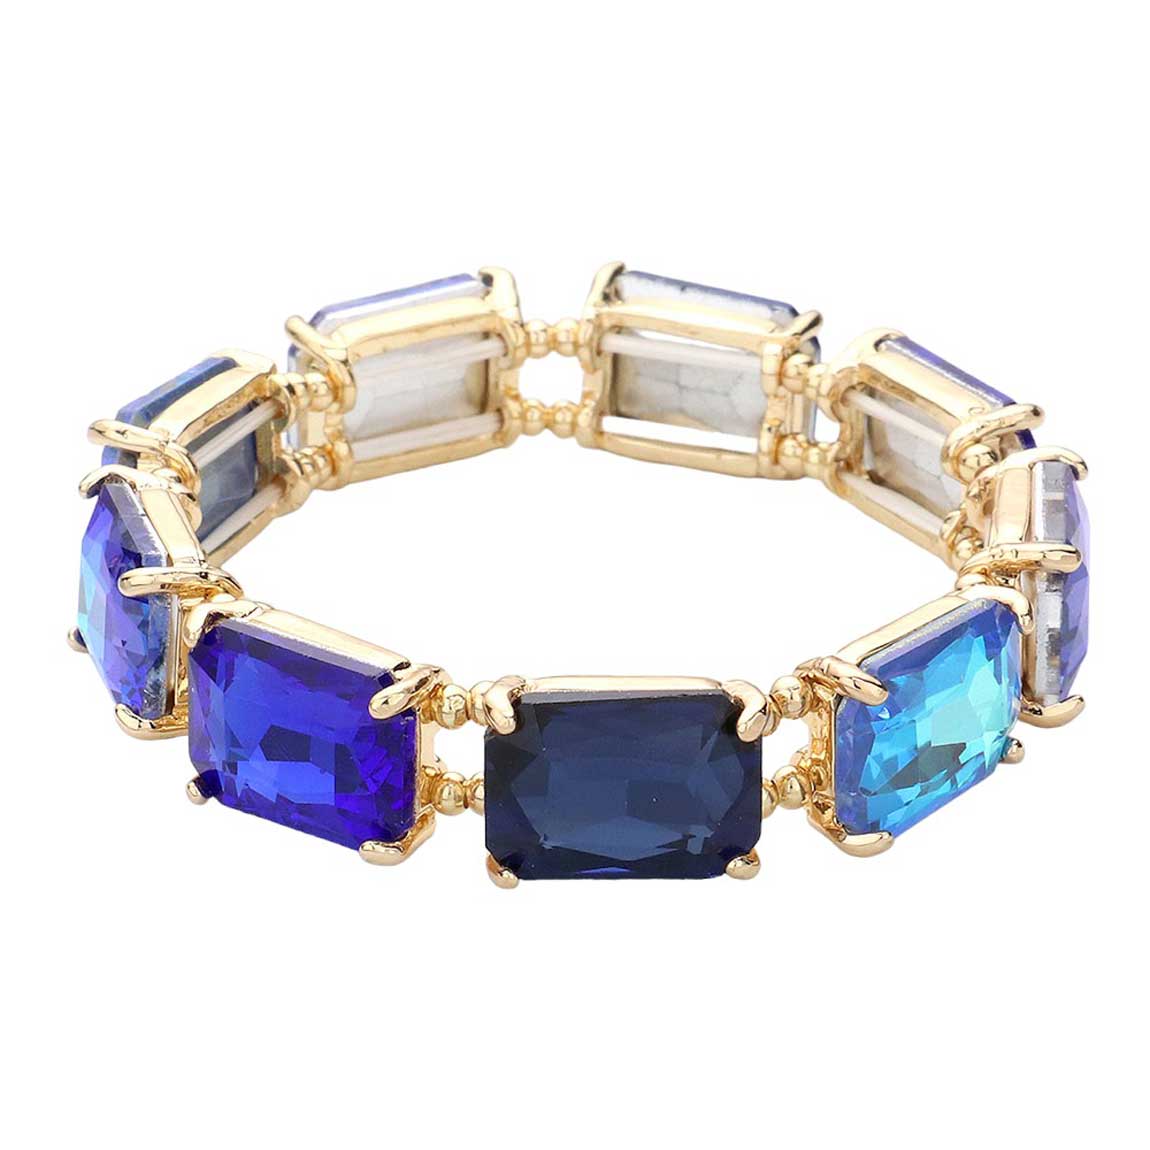 Blue Emerald Cut Stone Stretch Evening Bracelet, get ready with this Stretch Evening Bracelet to receive the best compliments on any special occasion. Put on a pop of color to complete your ensemble and make you stand out on special occasions. It looks so pretty, bright, and elegant on any special occasion. 